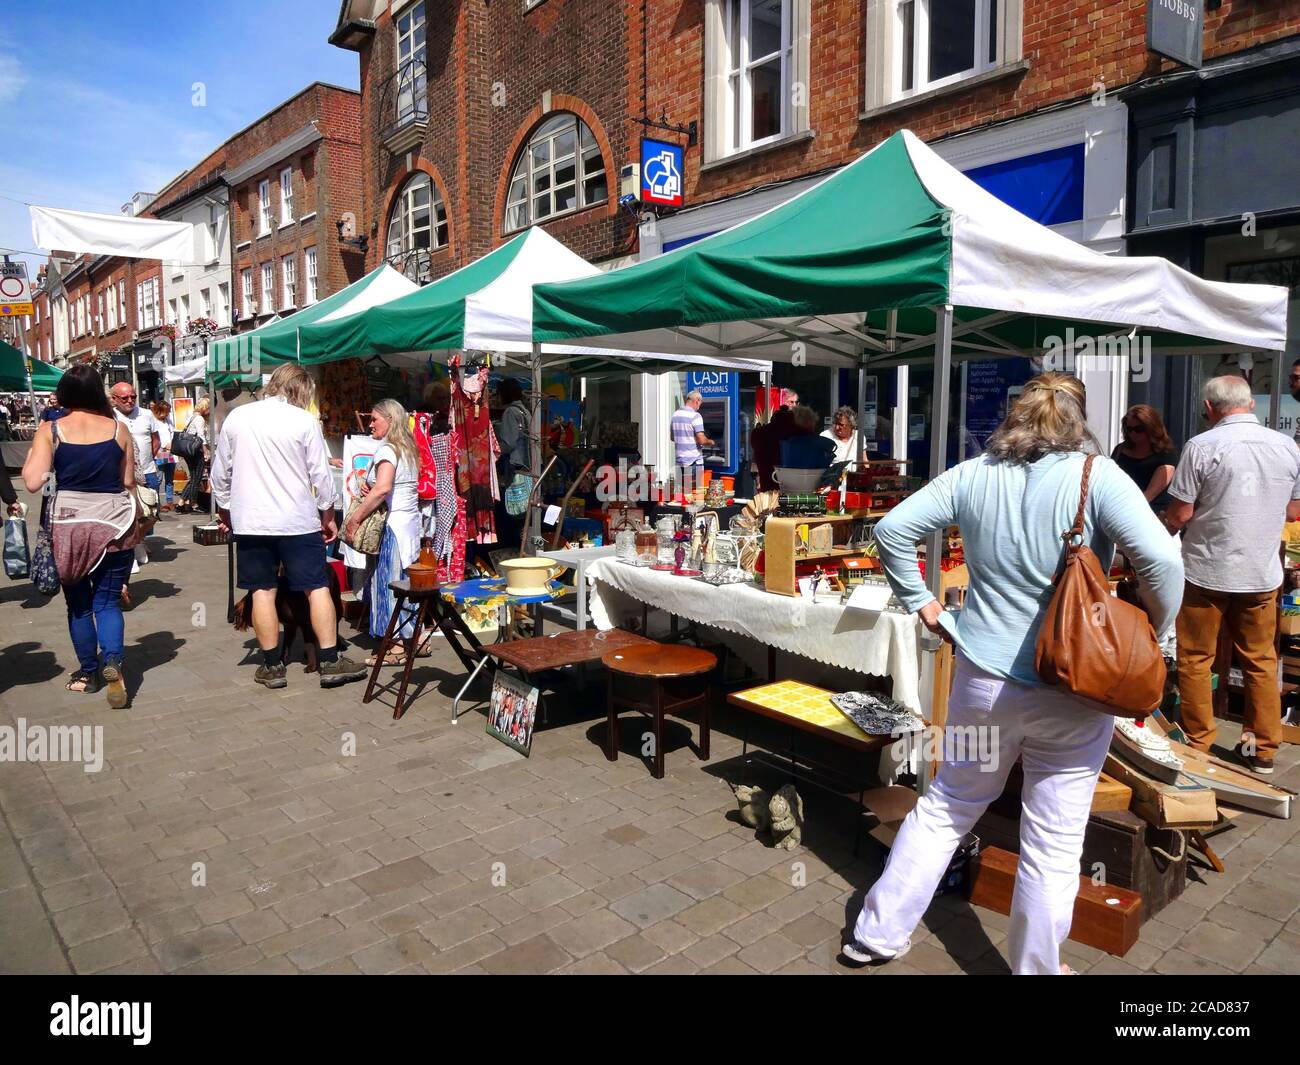 Winchester, UK - July 31, 2015:  Customers looking at antique and bric a brac stalls at the weekly street flea market which is a popular tourism trave Stock Photo